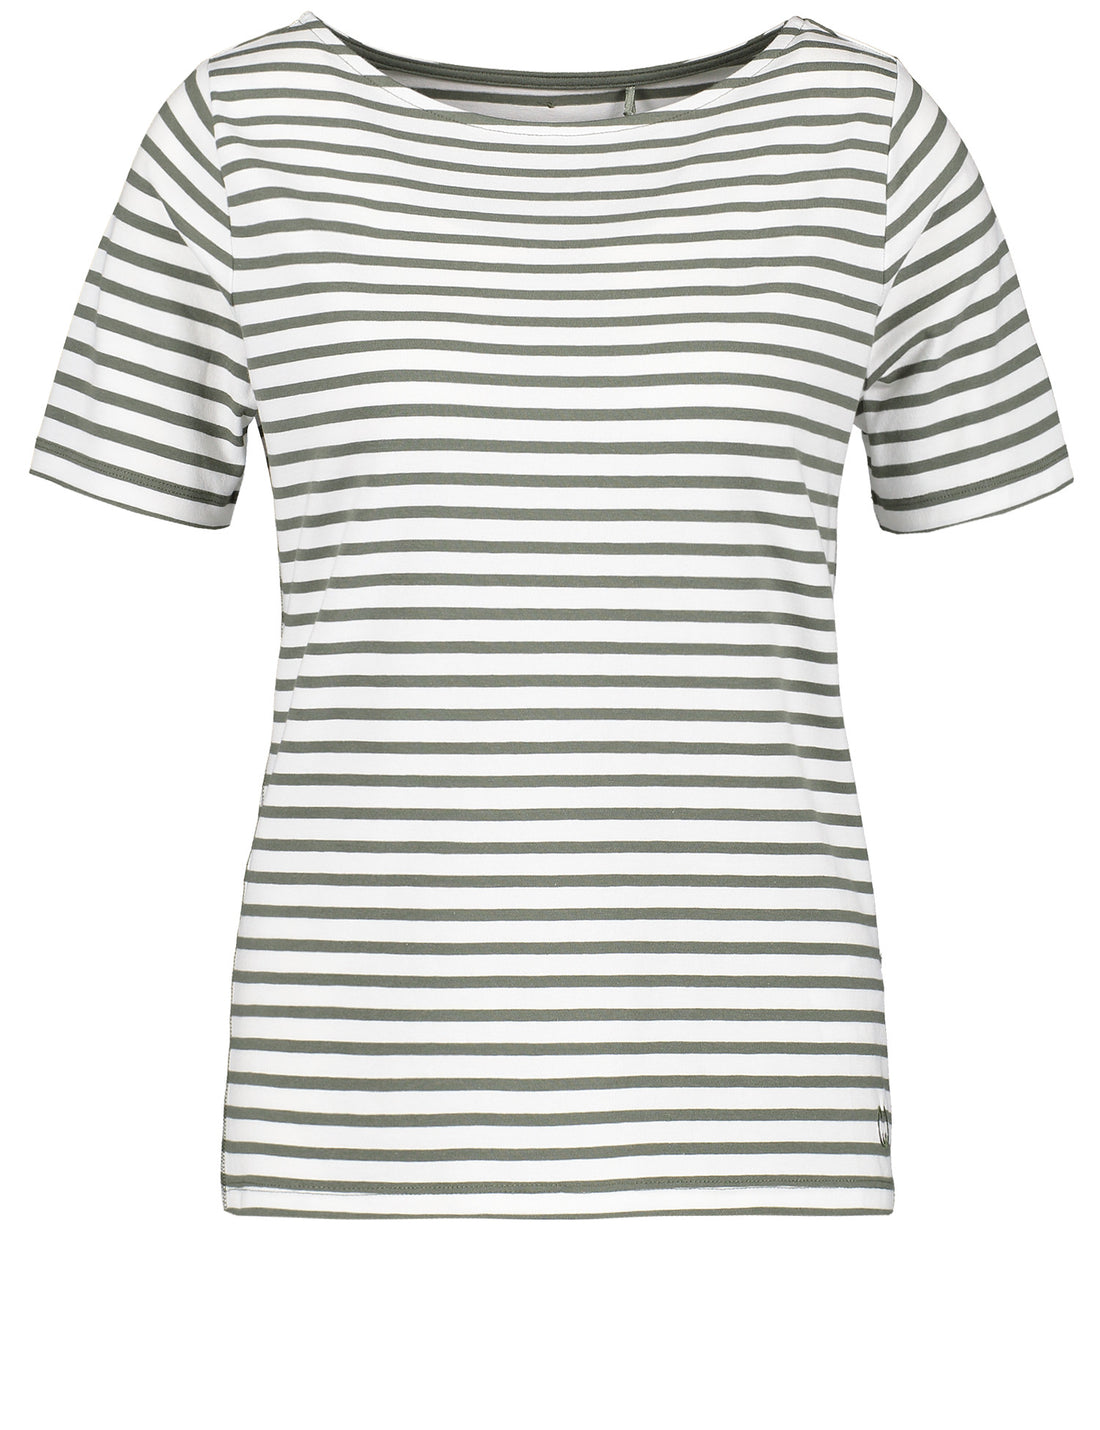 Gerry Weber Olive and White Stripe Tee